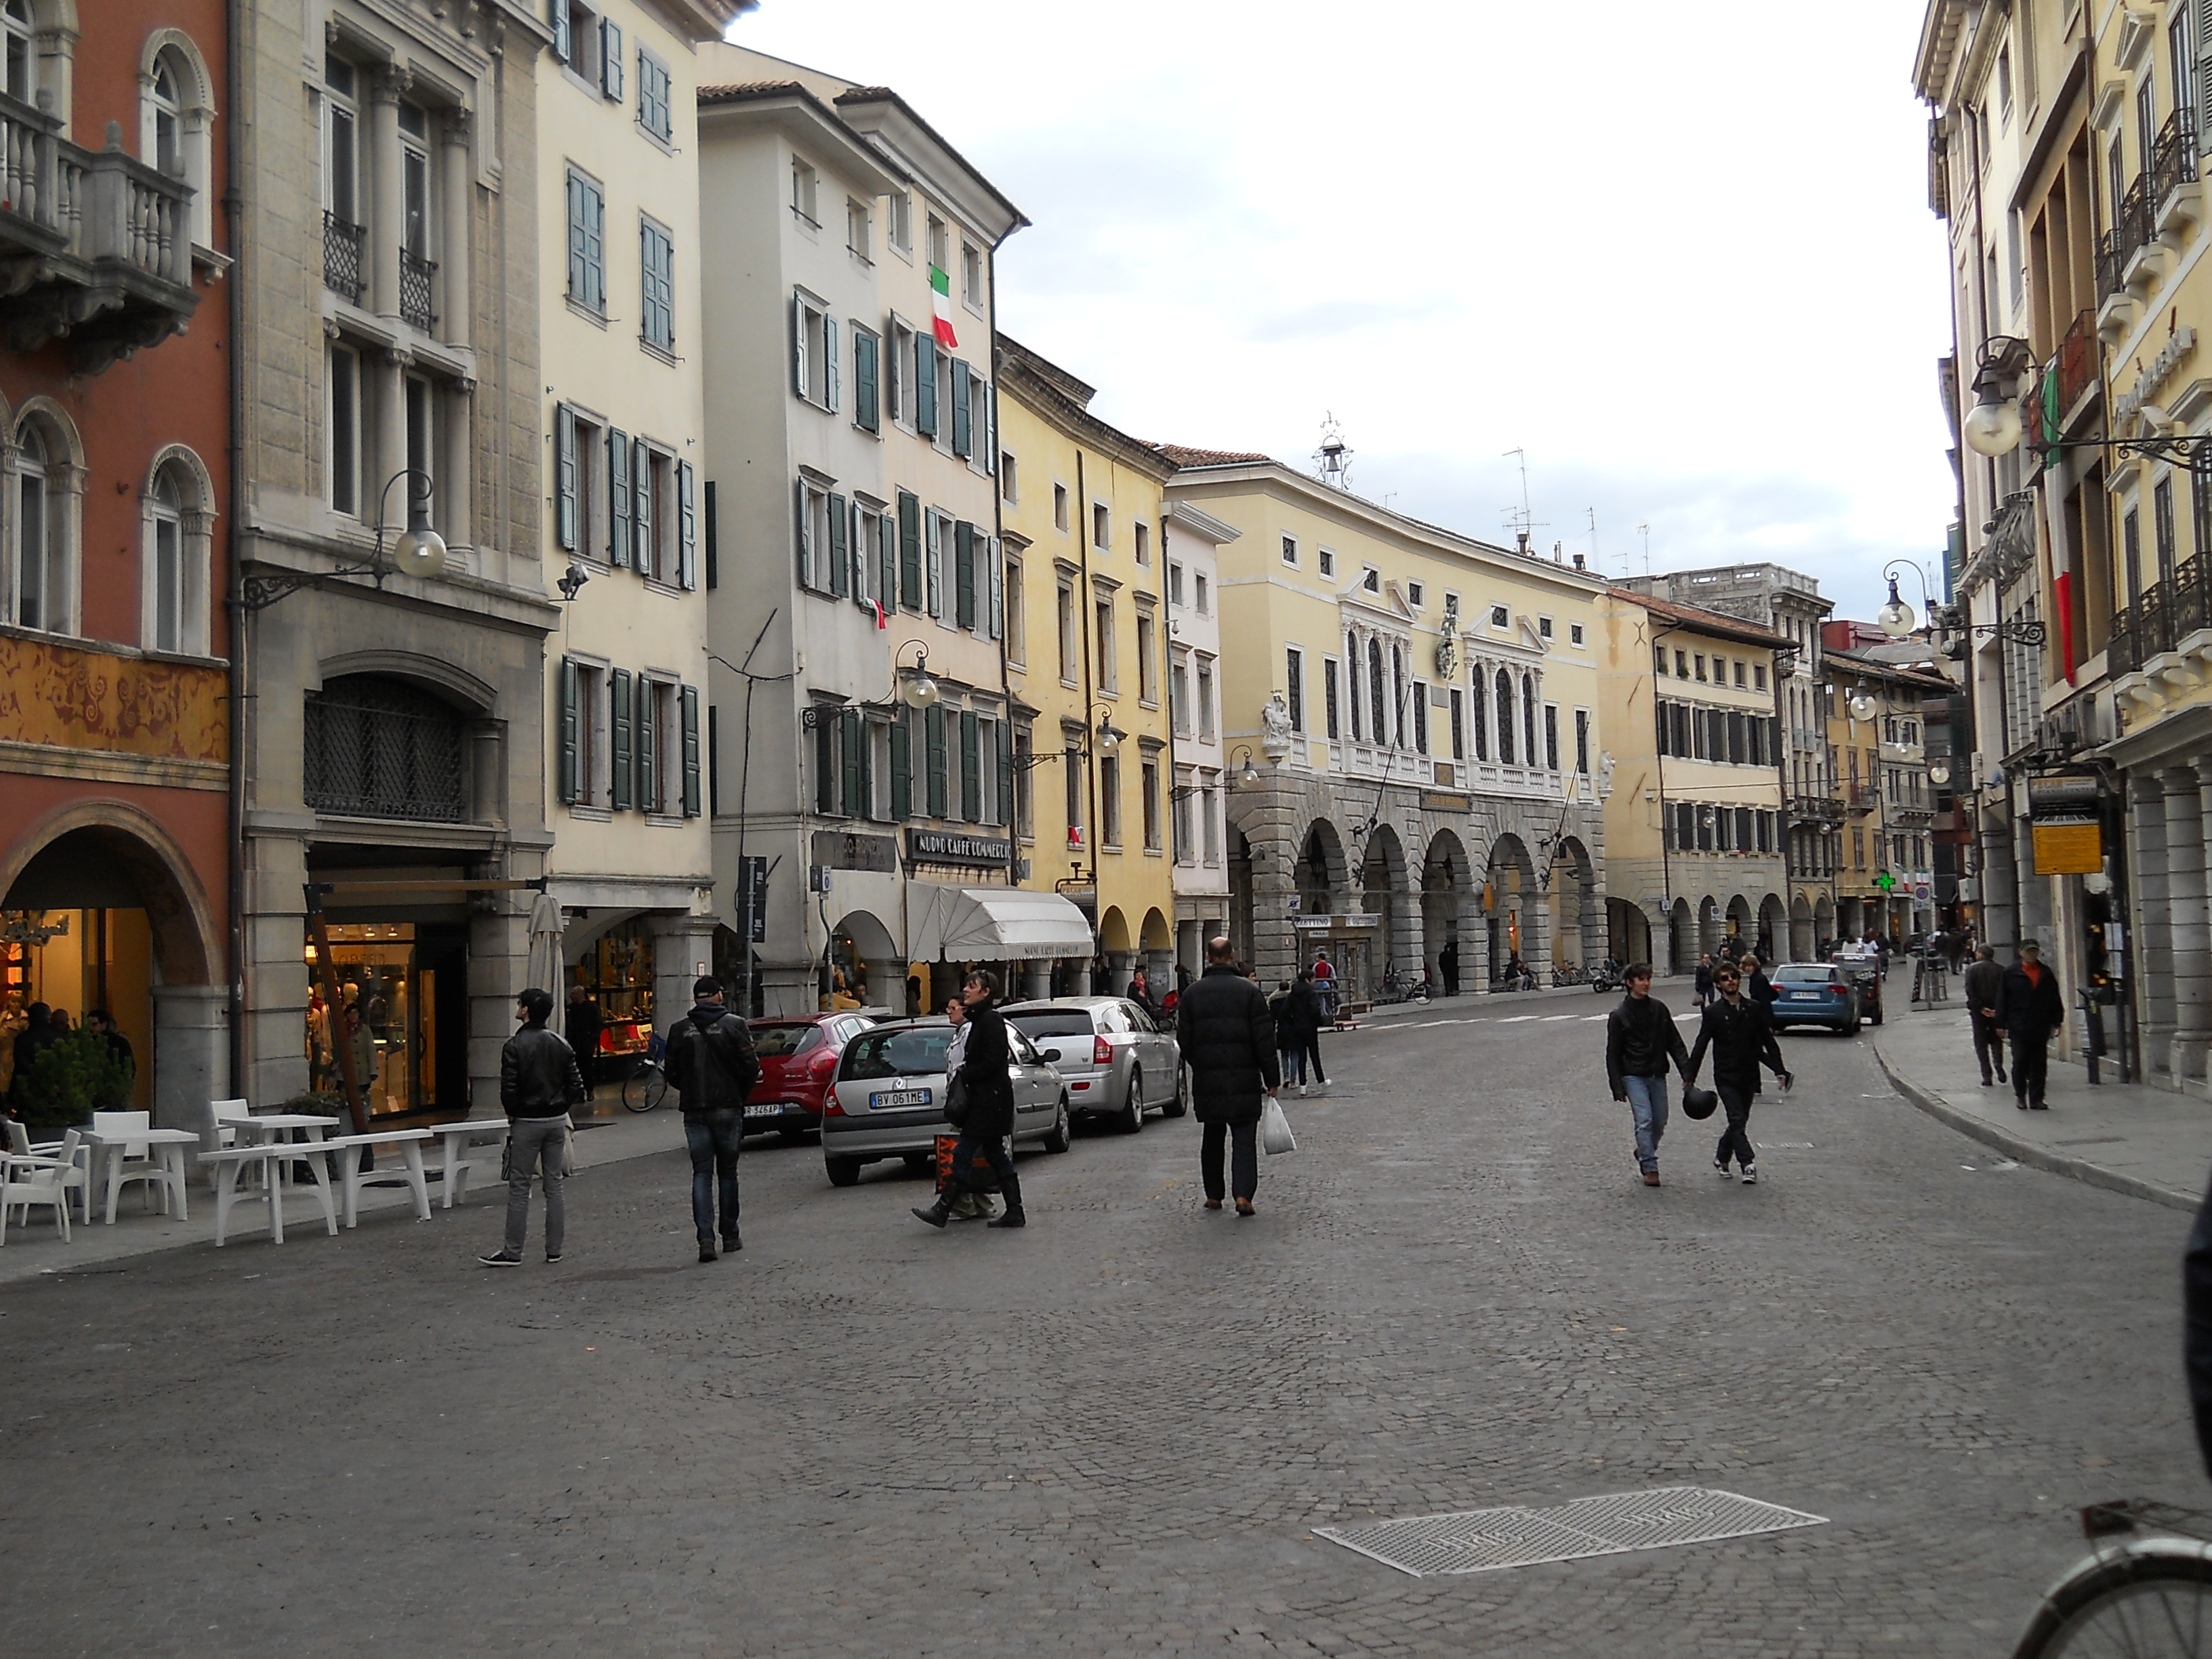 Via Mercatovecchio Udine: A picturesque town scene with charming architecture and a lively atmosphere.